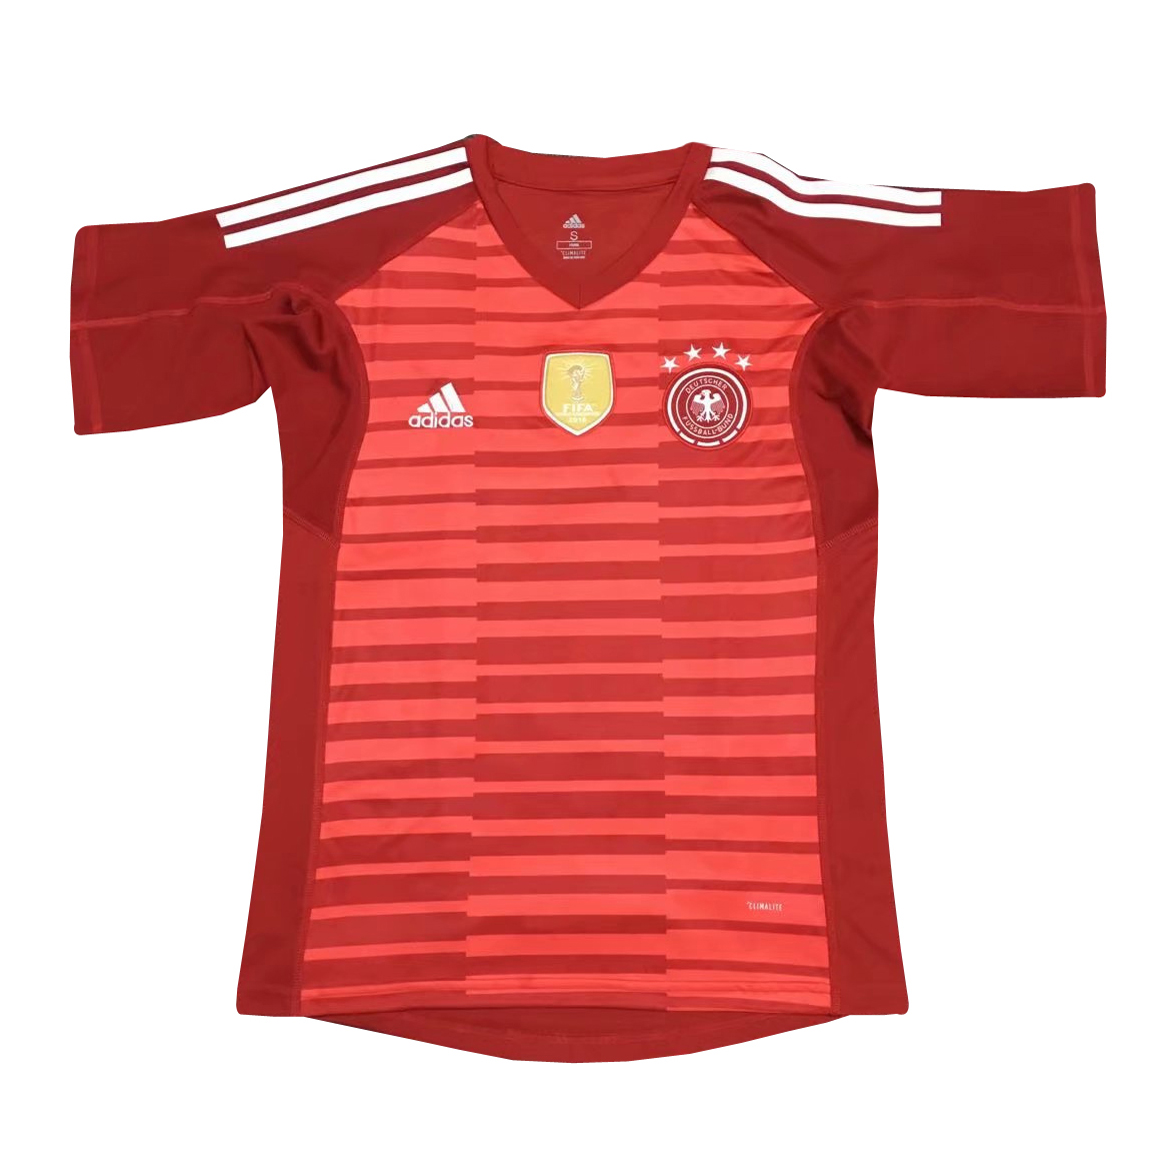 germany red jersey